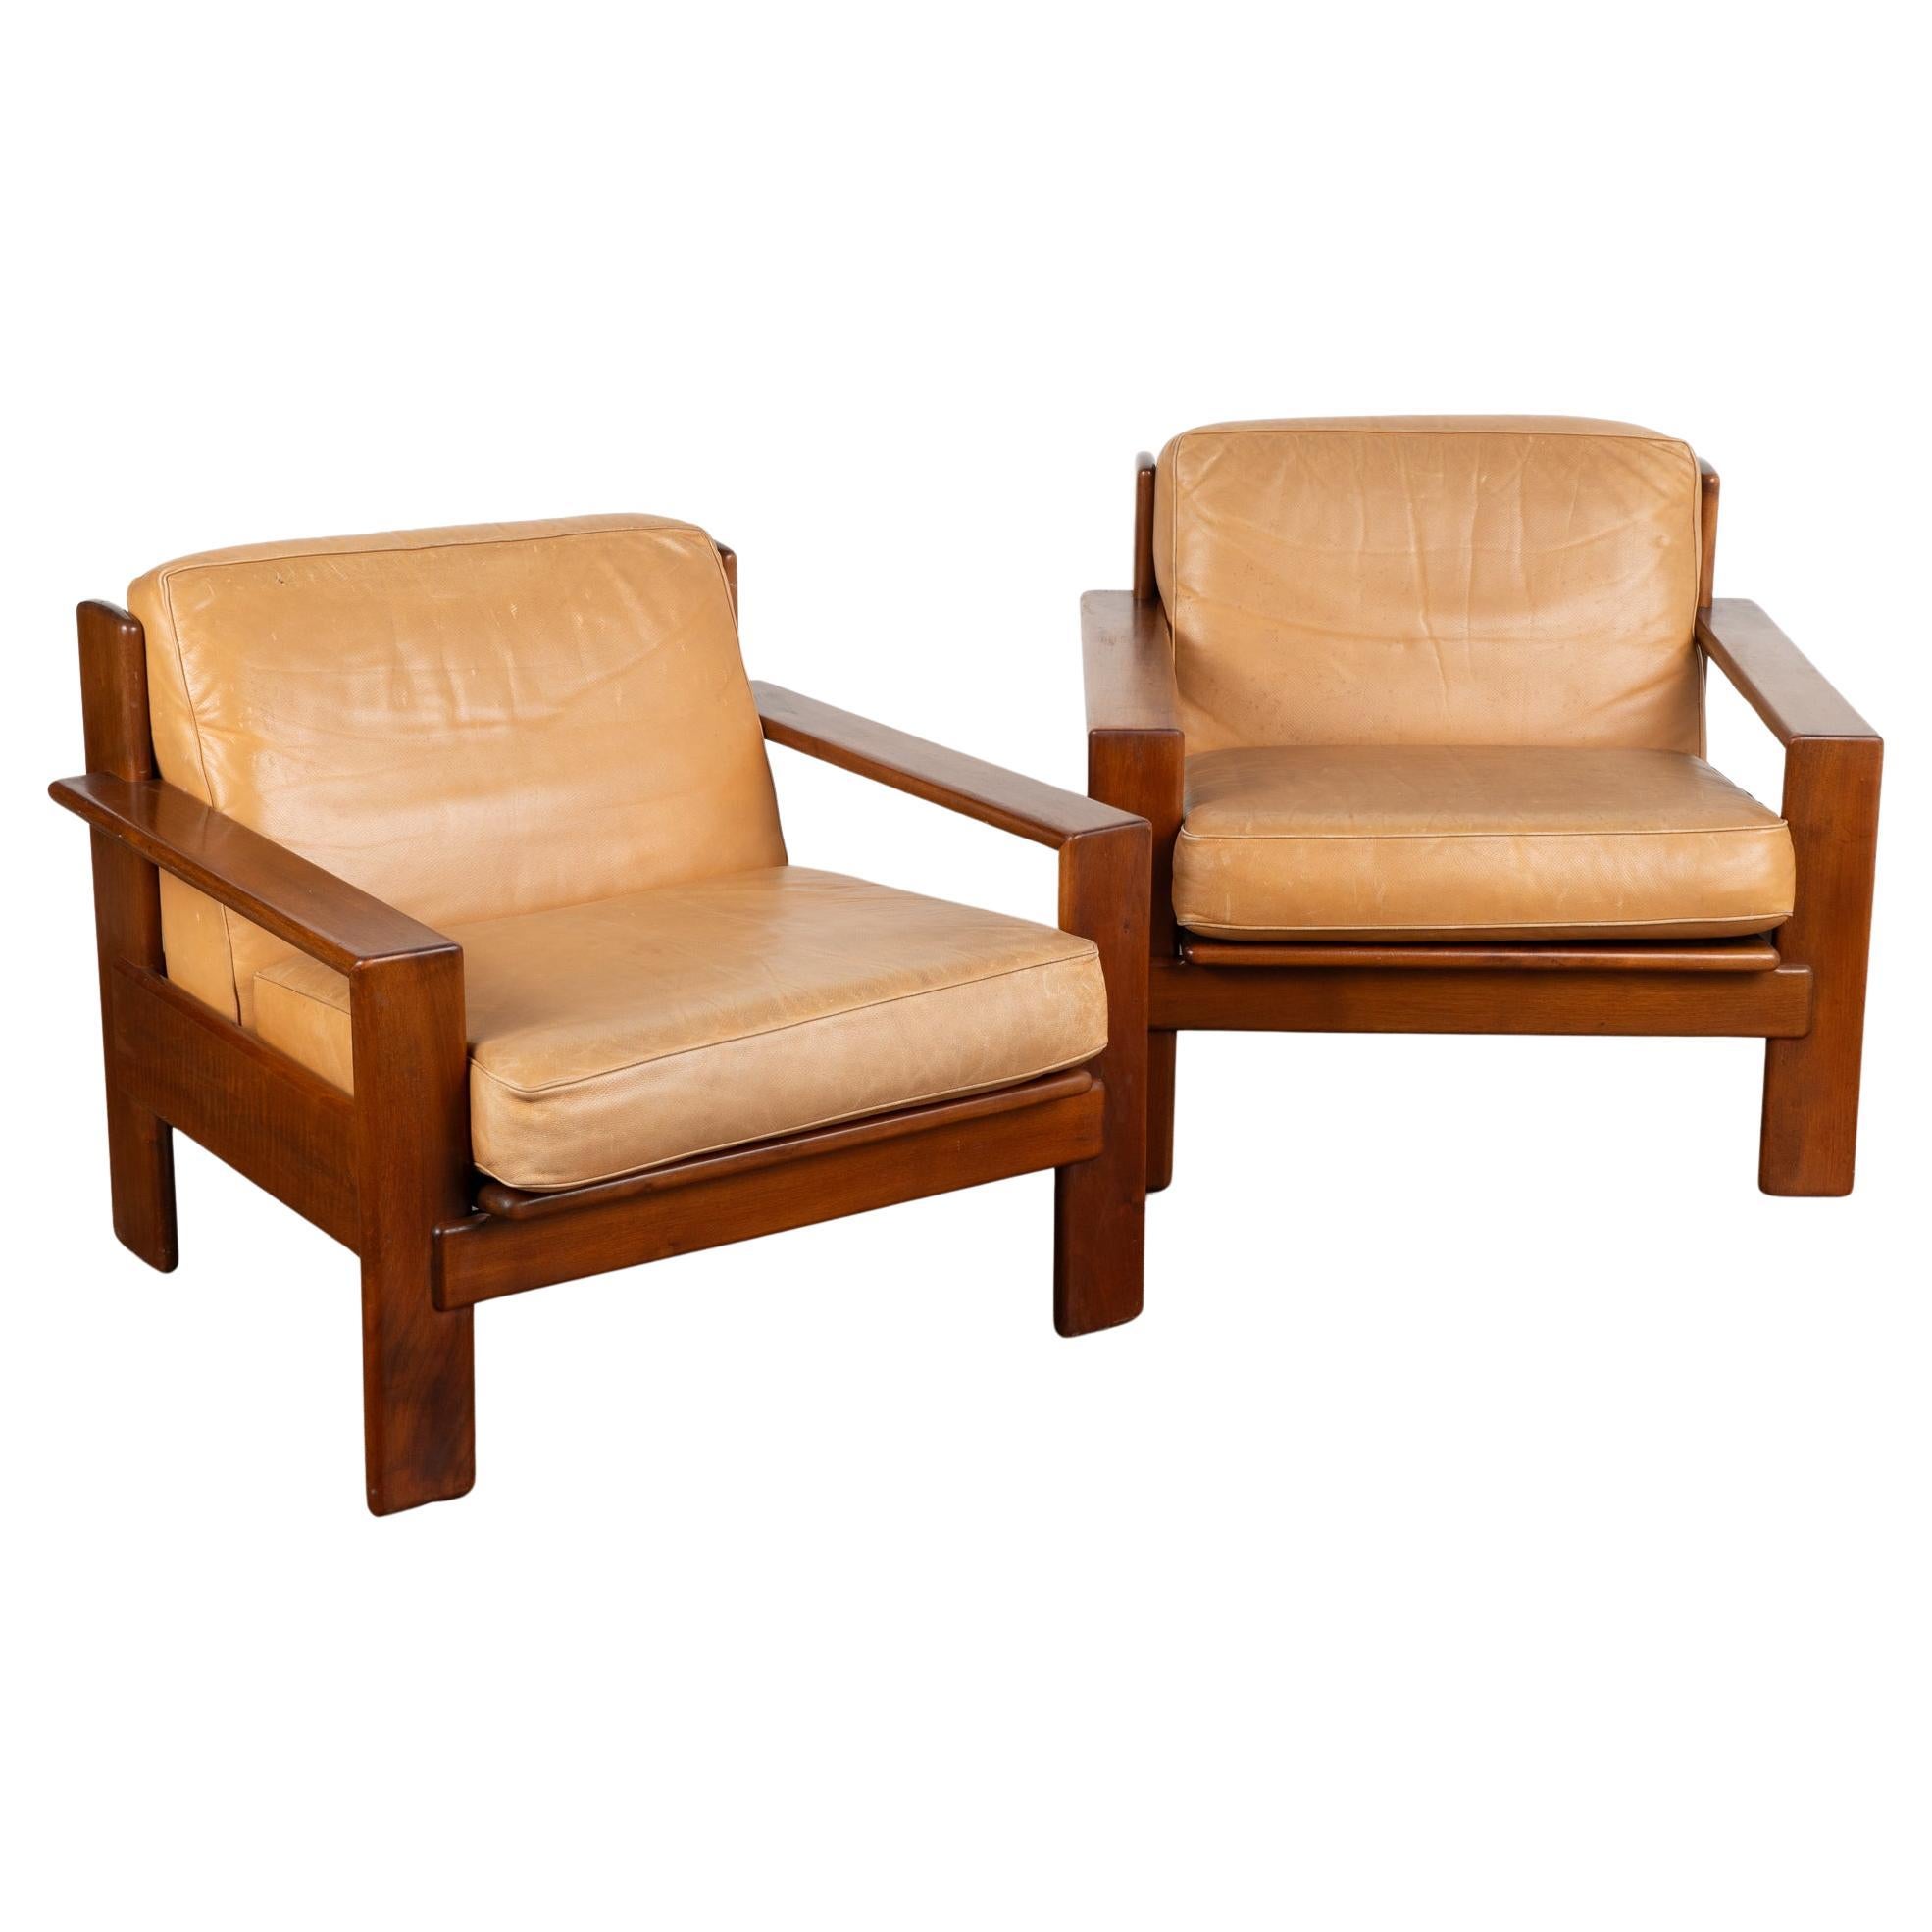 Pair, Mid Century Camel Leather Arm Chairs, Denmark circa 1960 For Sale